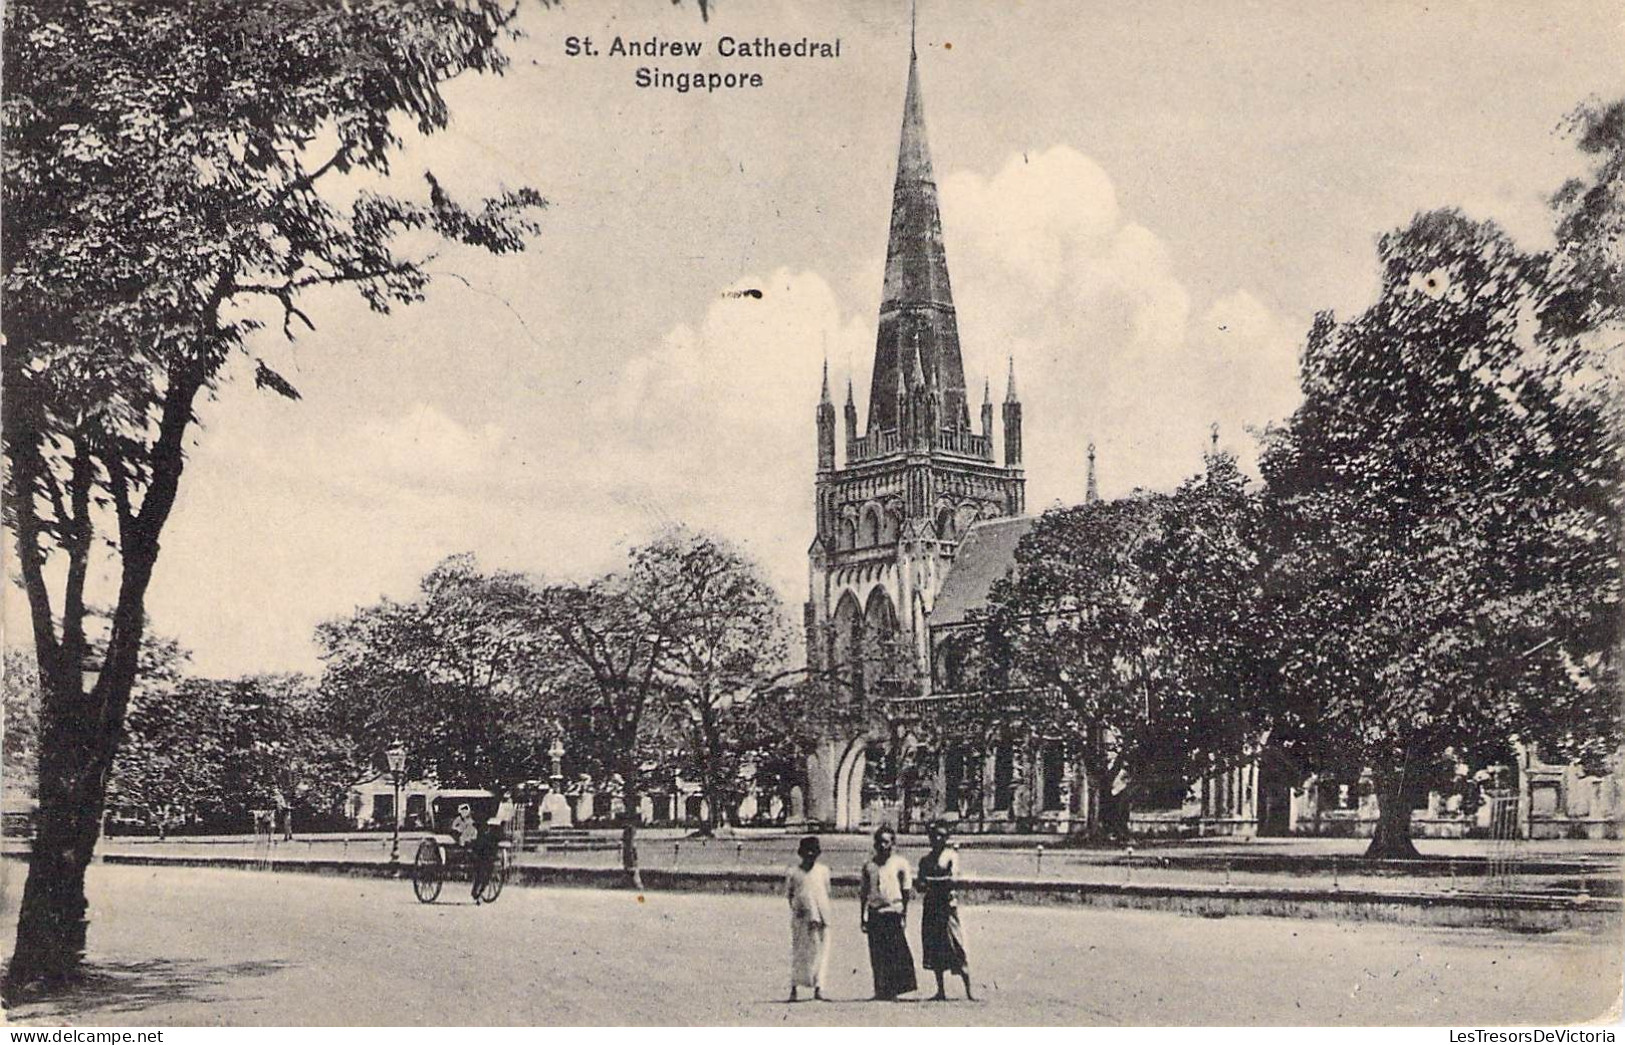 Chine - St Andrew Cathedral - Singapore - Singapoure - Animé  - Carte Postale Ancienne - Chine